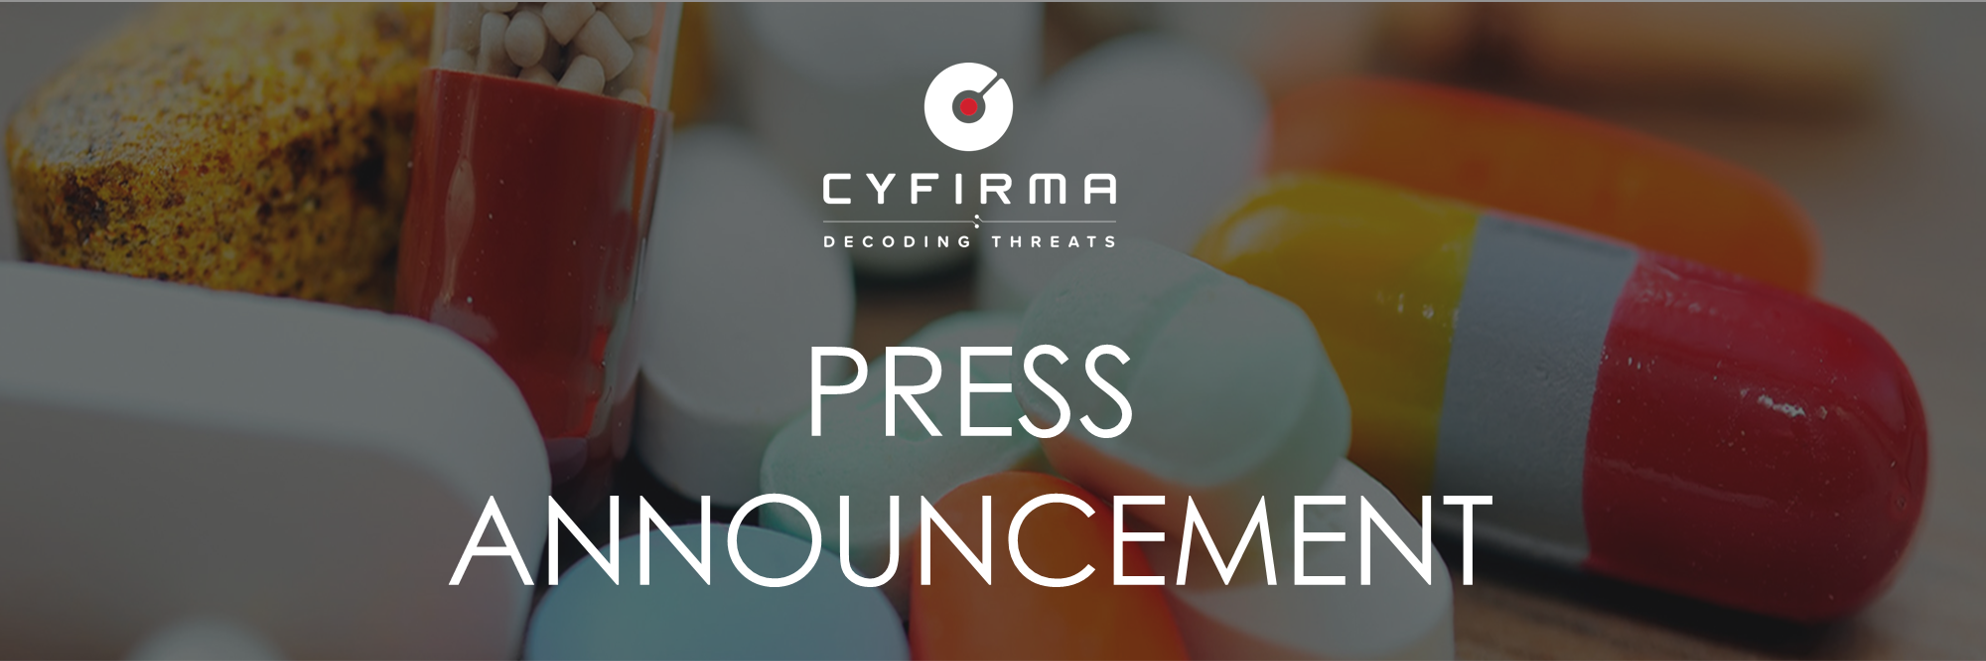 Zuellig Pharma Selects CYFIRMA to Elevate Cyber-intelligence Capabilities and Strengthen Cybersecurity Posture